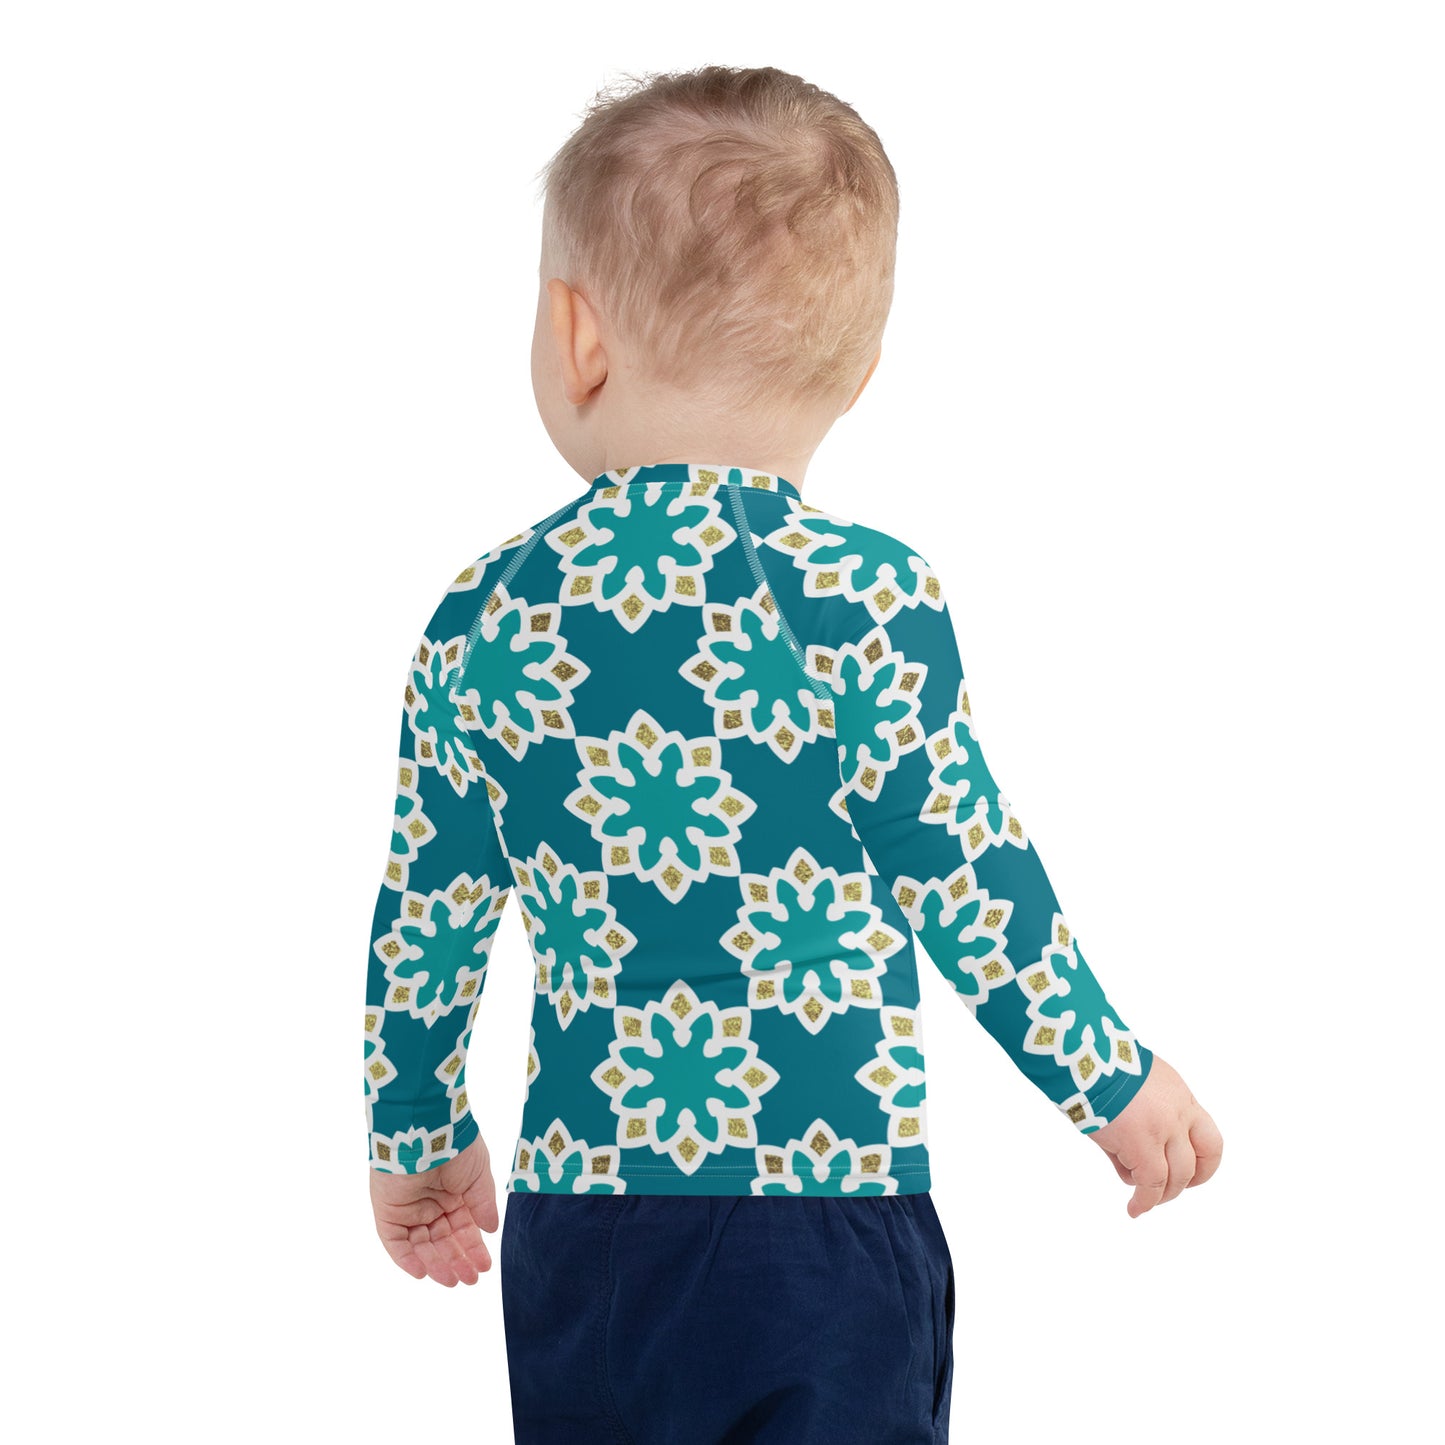 Kids Rash Guard 2T to 7 years - Arabesque Flowers in Aqua and Gold